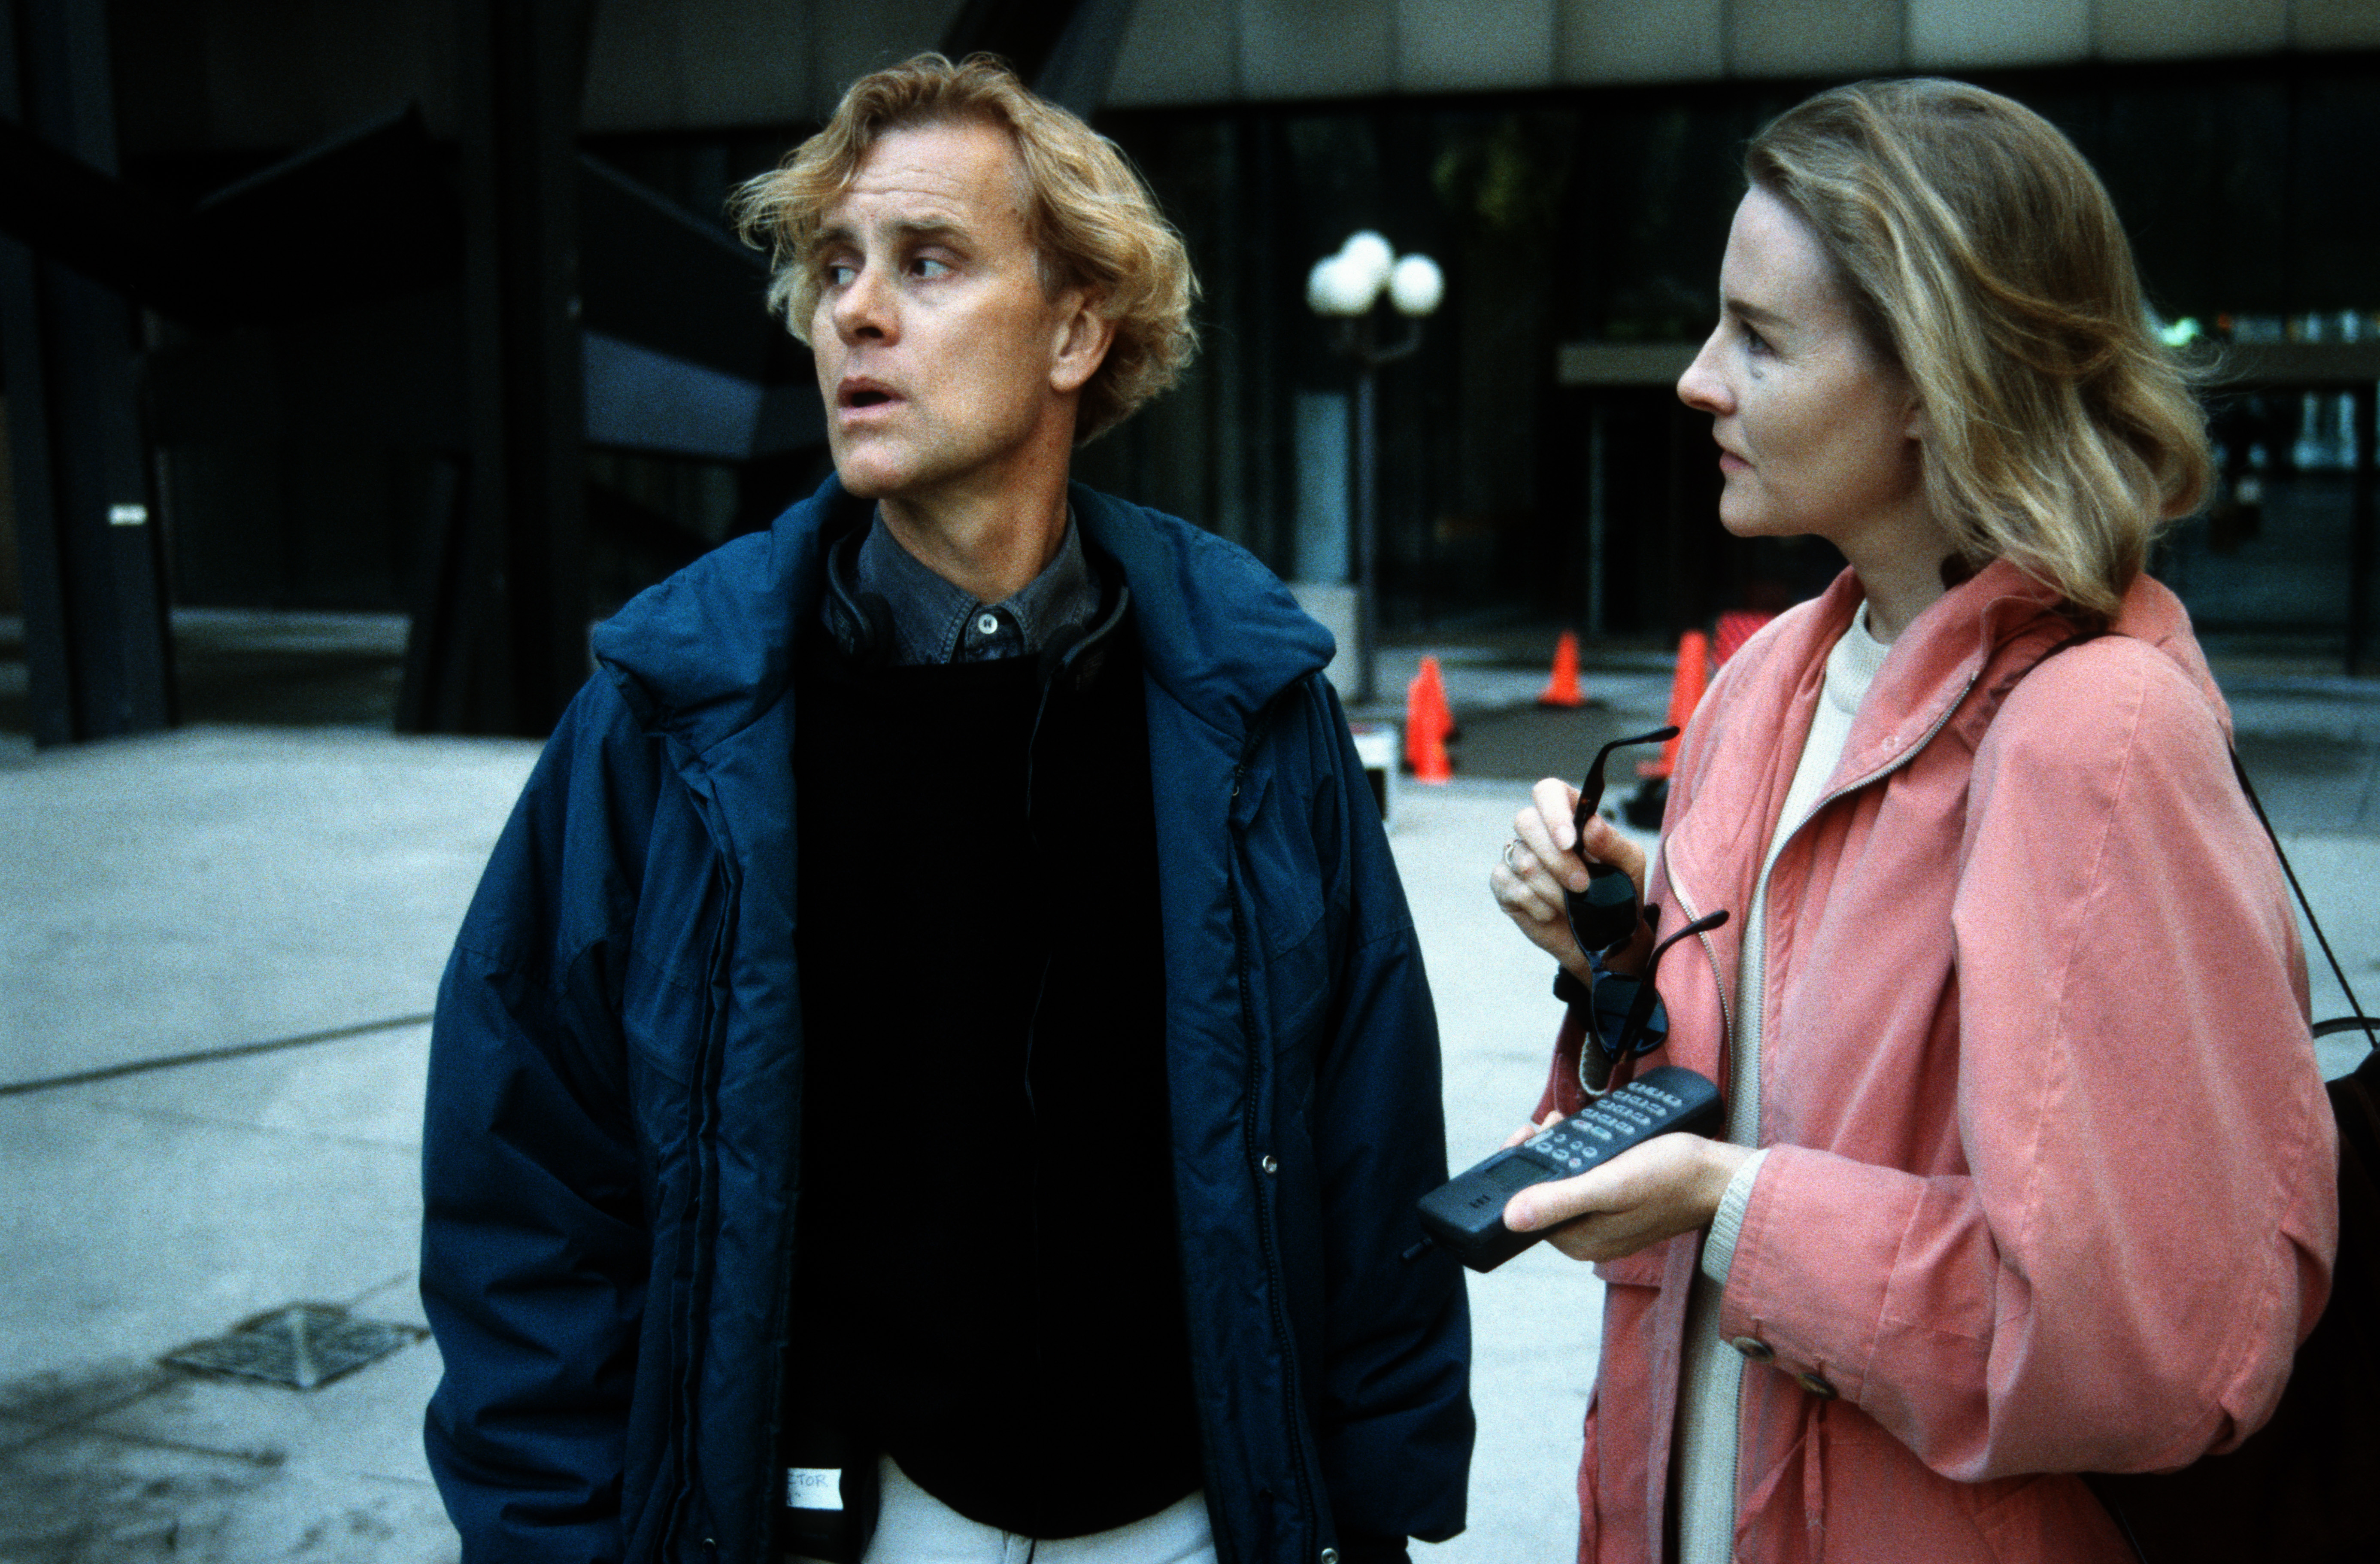 Curt Truninger and Margrit Ritzmann on set of Waiting for Michelangelo